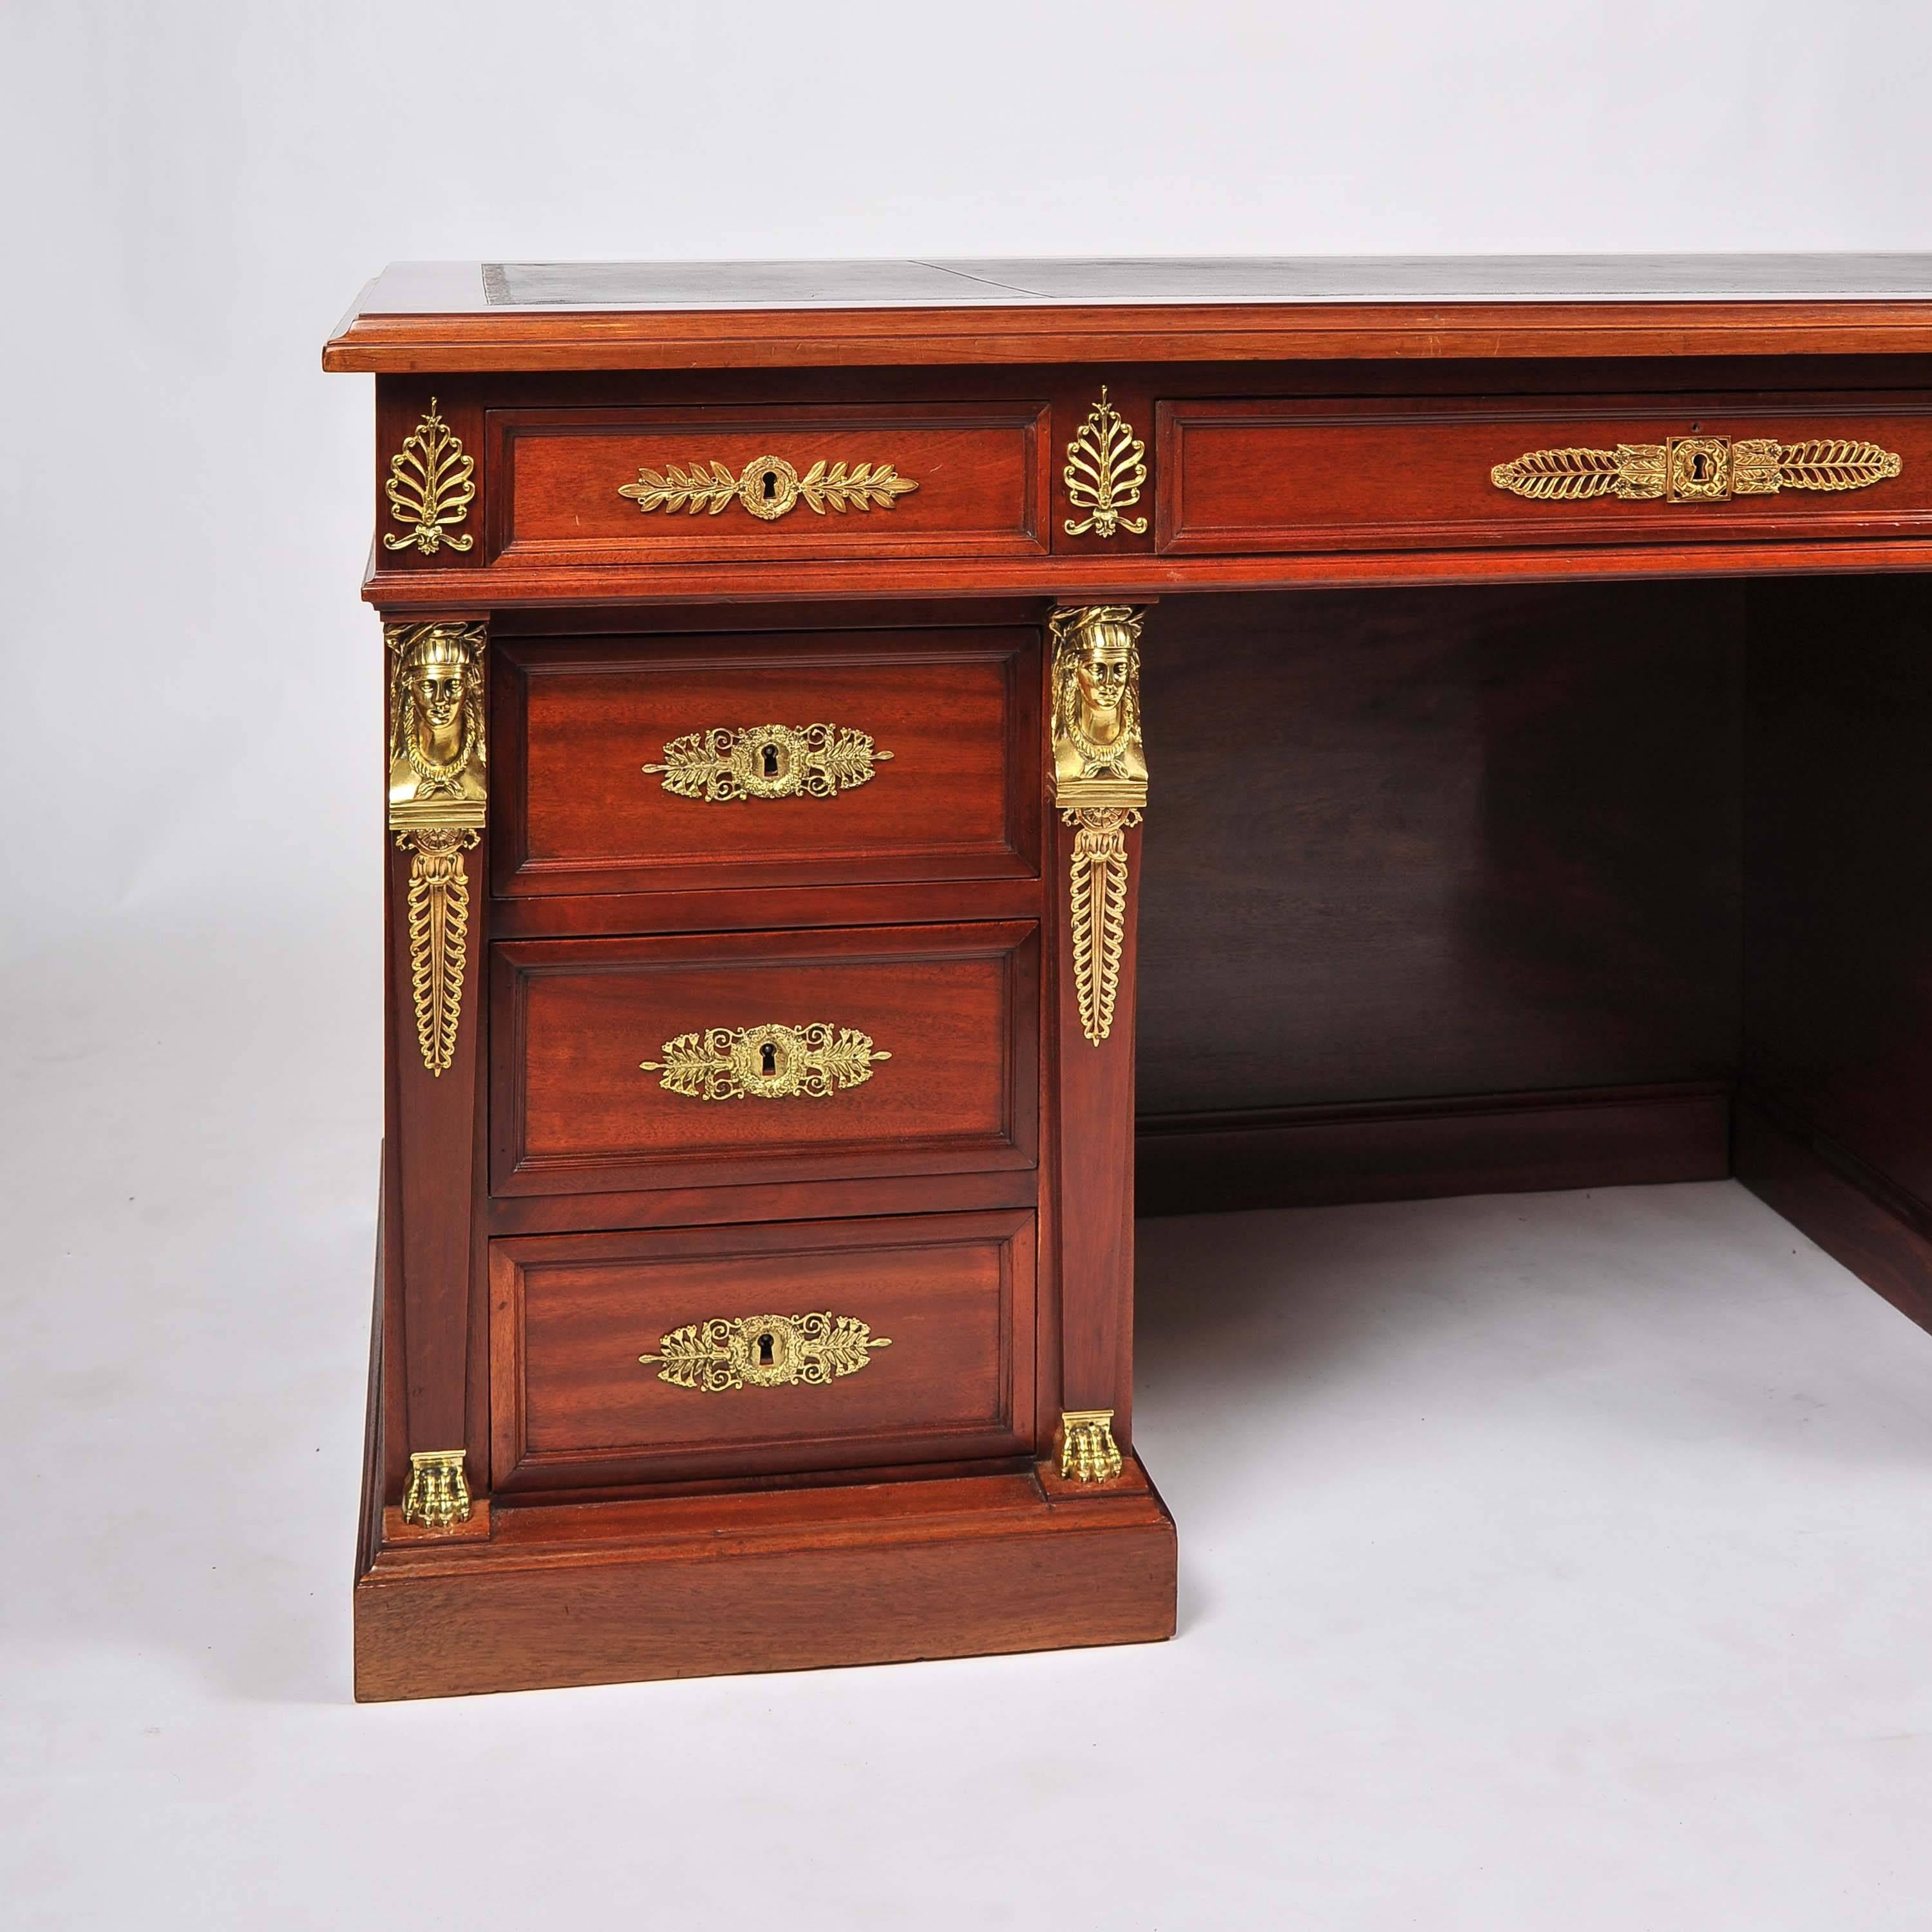 A fine French late 19th century mahogany and ormolu pedestal desk with tooled leather top in the Empire style, having nine drawers, one containing a locking secret compartment, with two secretary writing slides to either side of top.